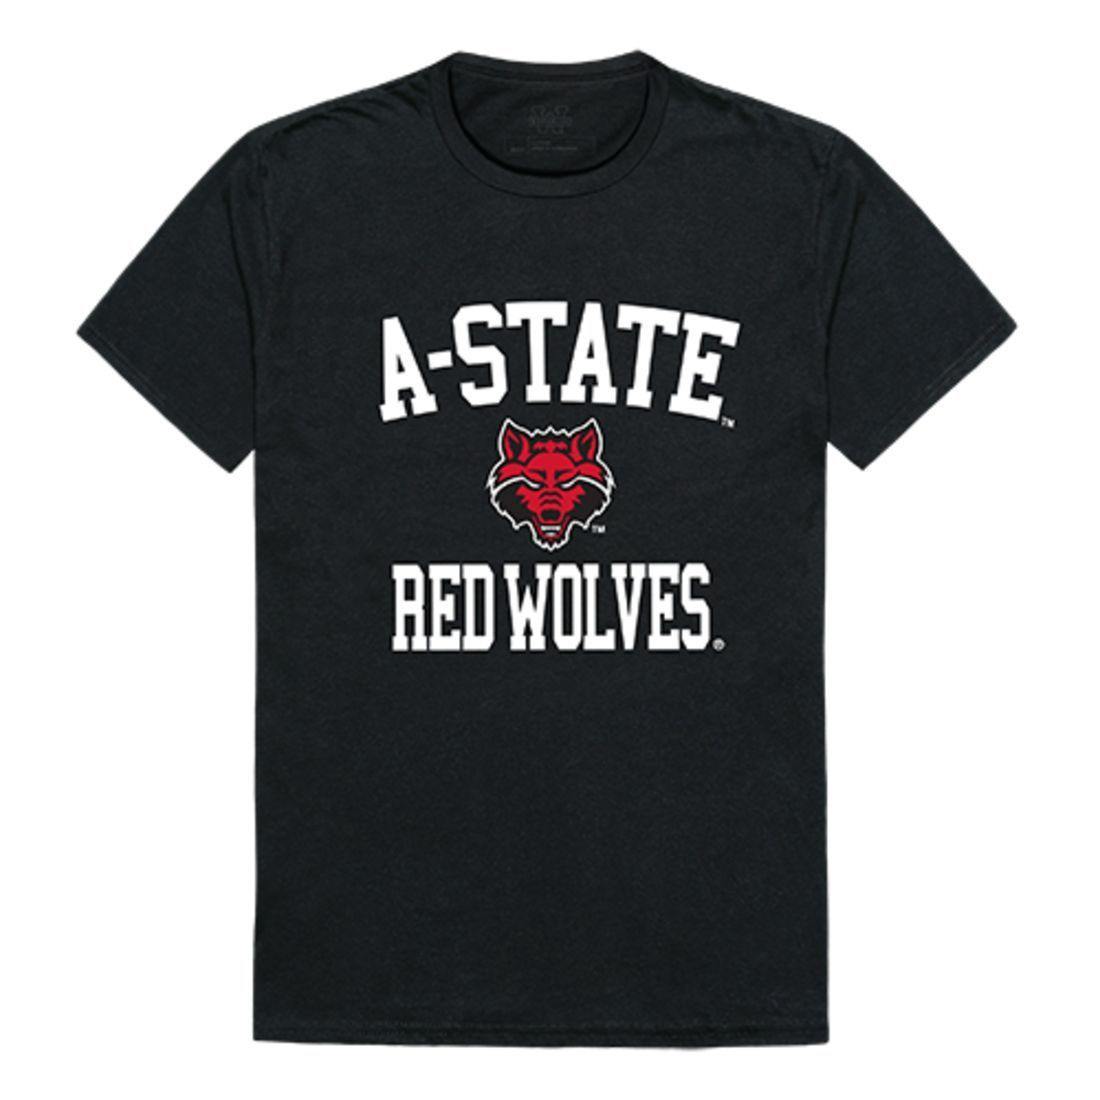 Arkansas A-State University Red Wolves Arch T-Shirt Black-Campus-Wardrobe